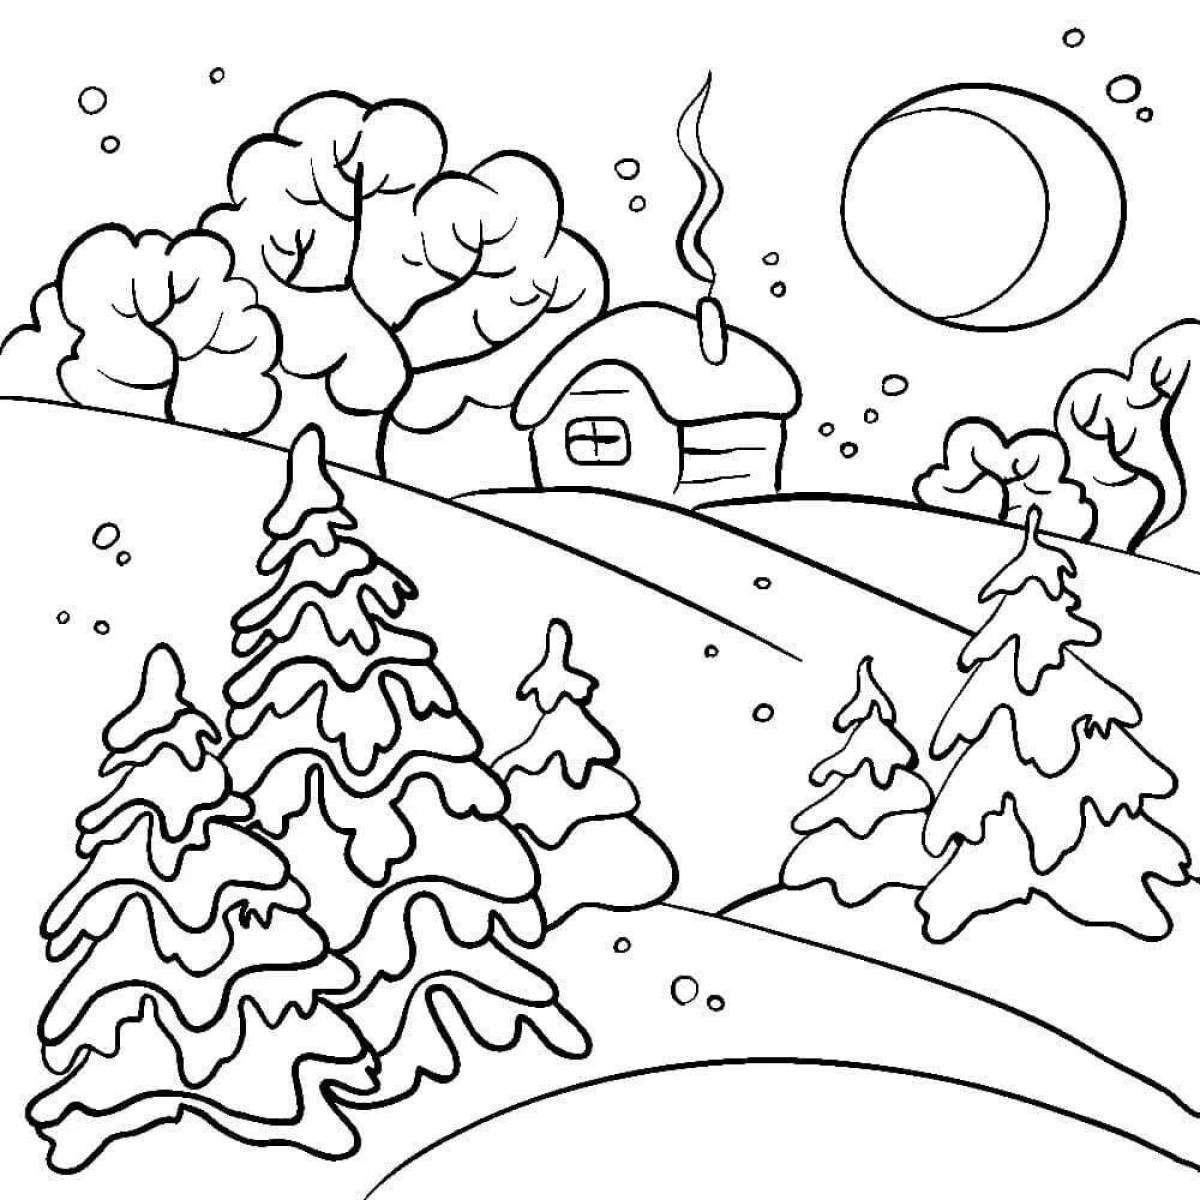 Amazing winter landscape coloring book for children 10 years old